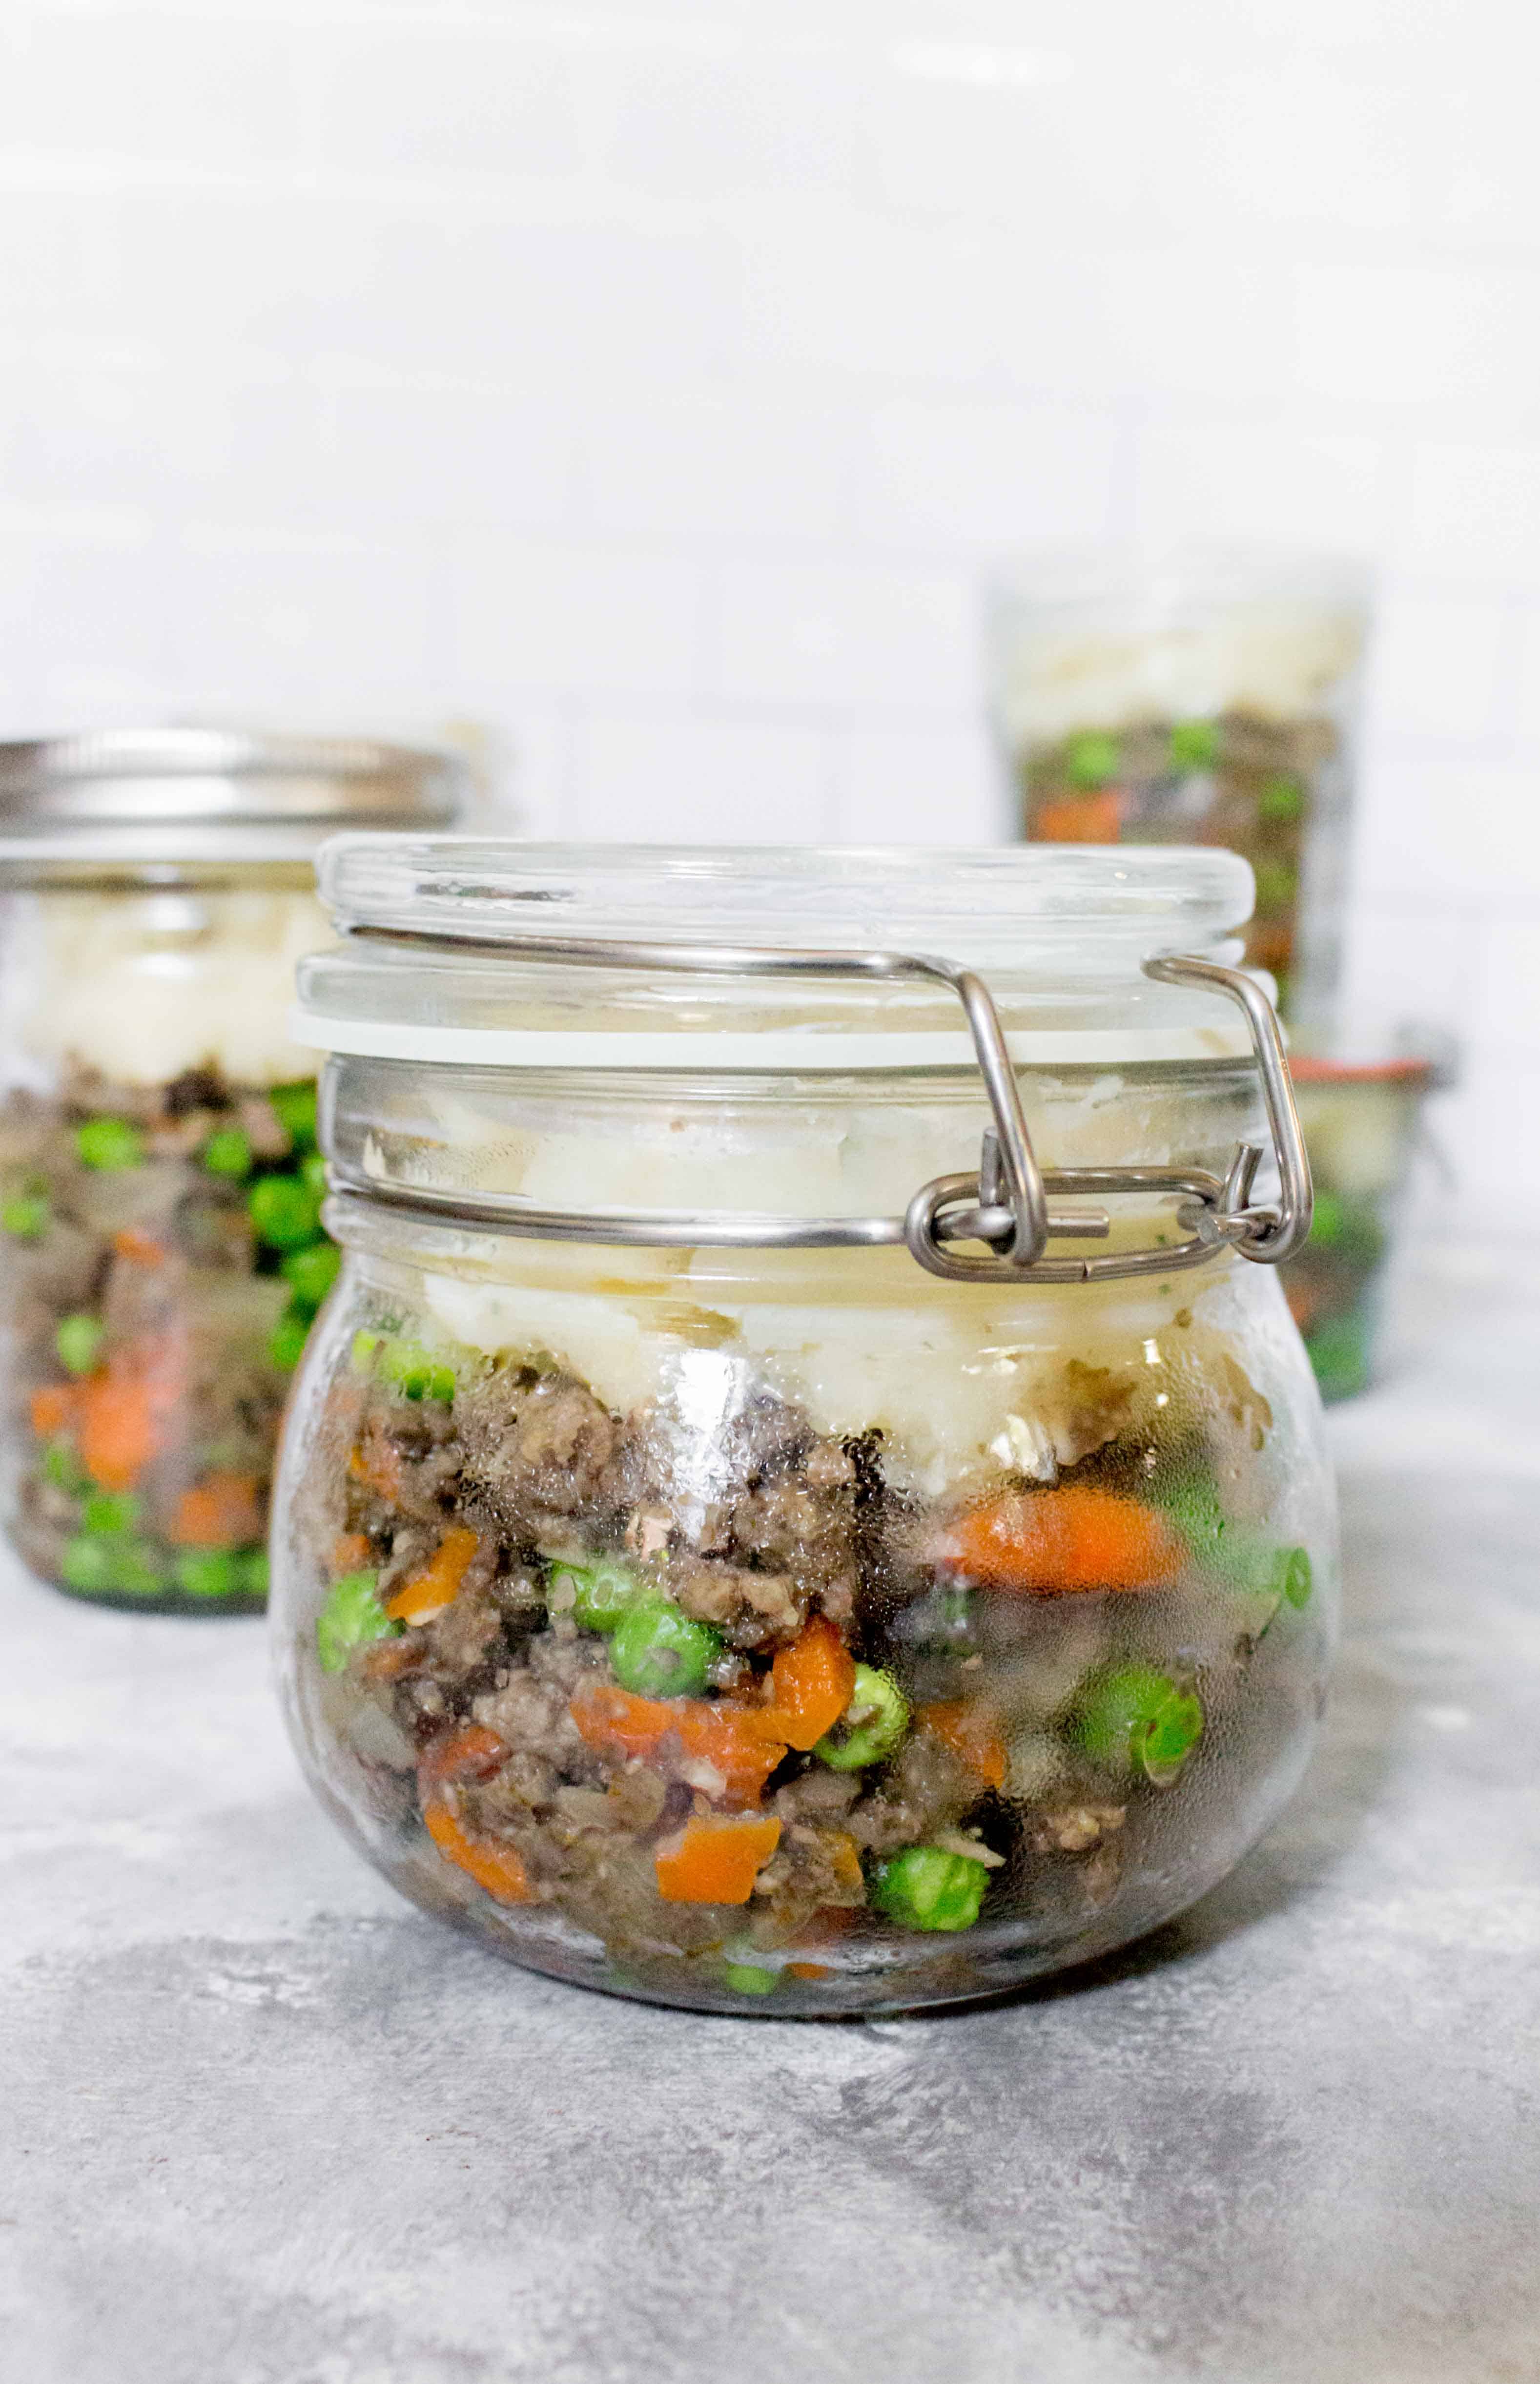 Craving some comfort food but don't want to feel weighed down? This Mason Jar Sheppard's Pie Meal Prep is packed with veggies and is the perfect grab and go lunch!